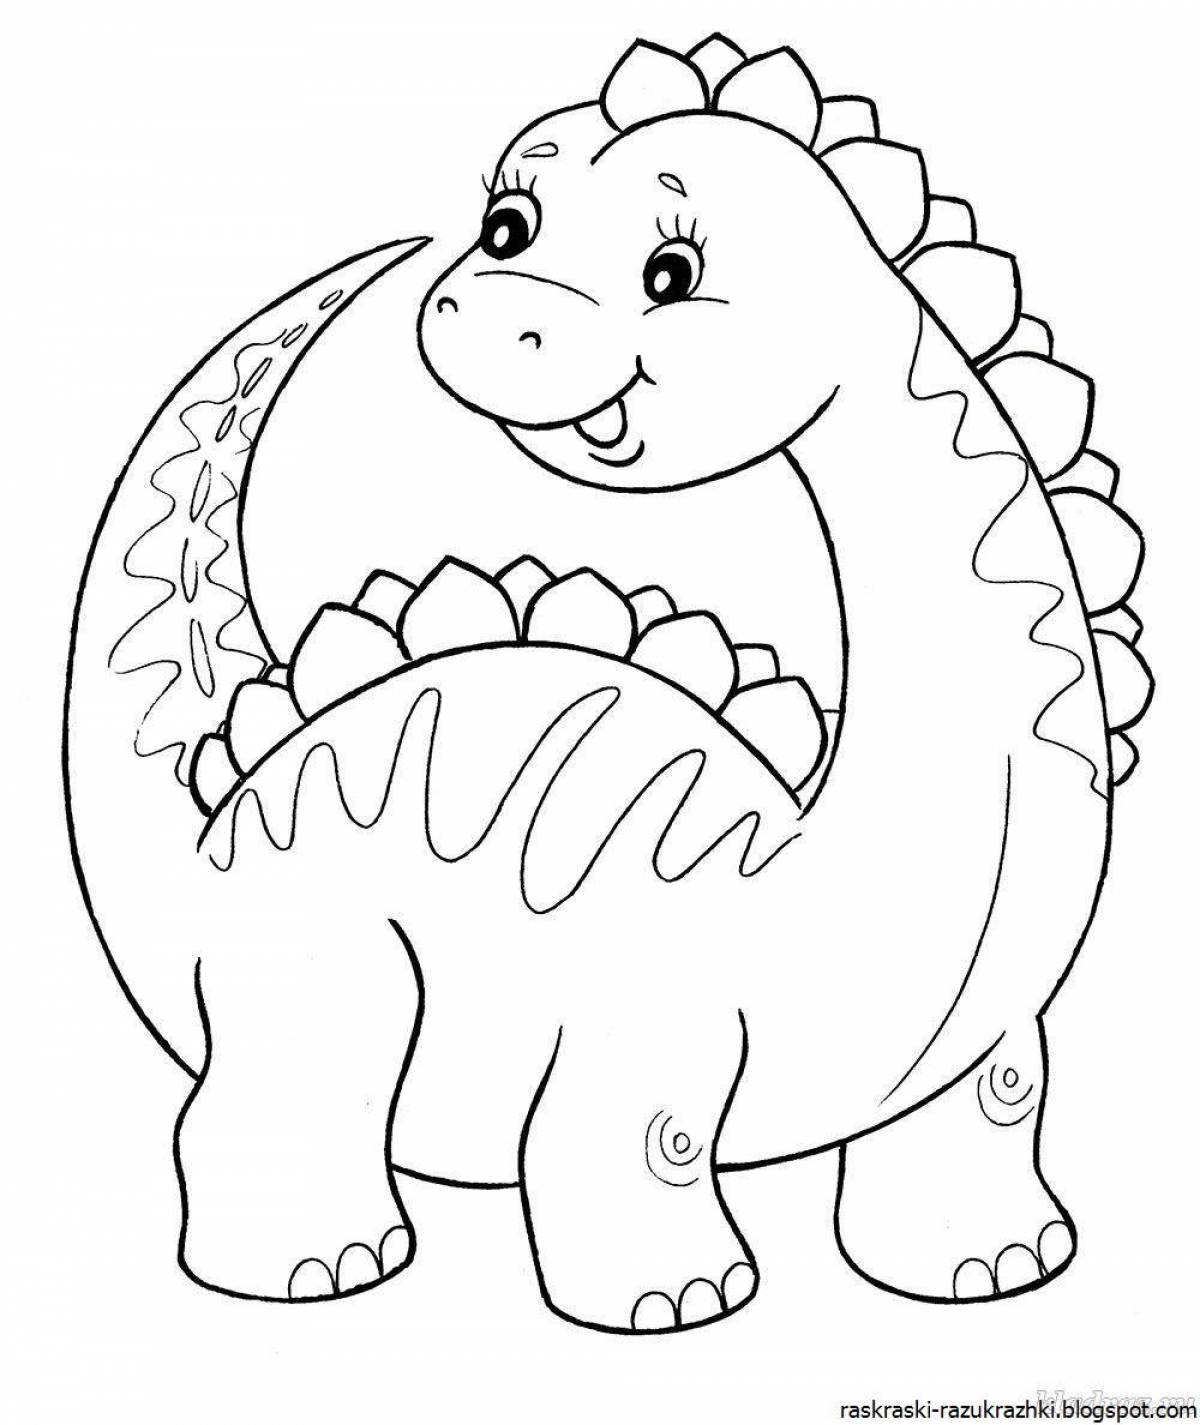 Coloring dinosaurs for children 5-6 years old